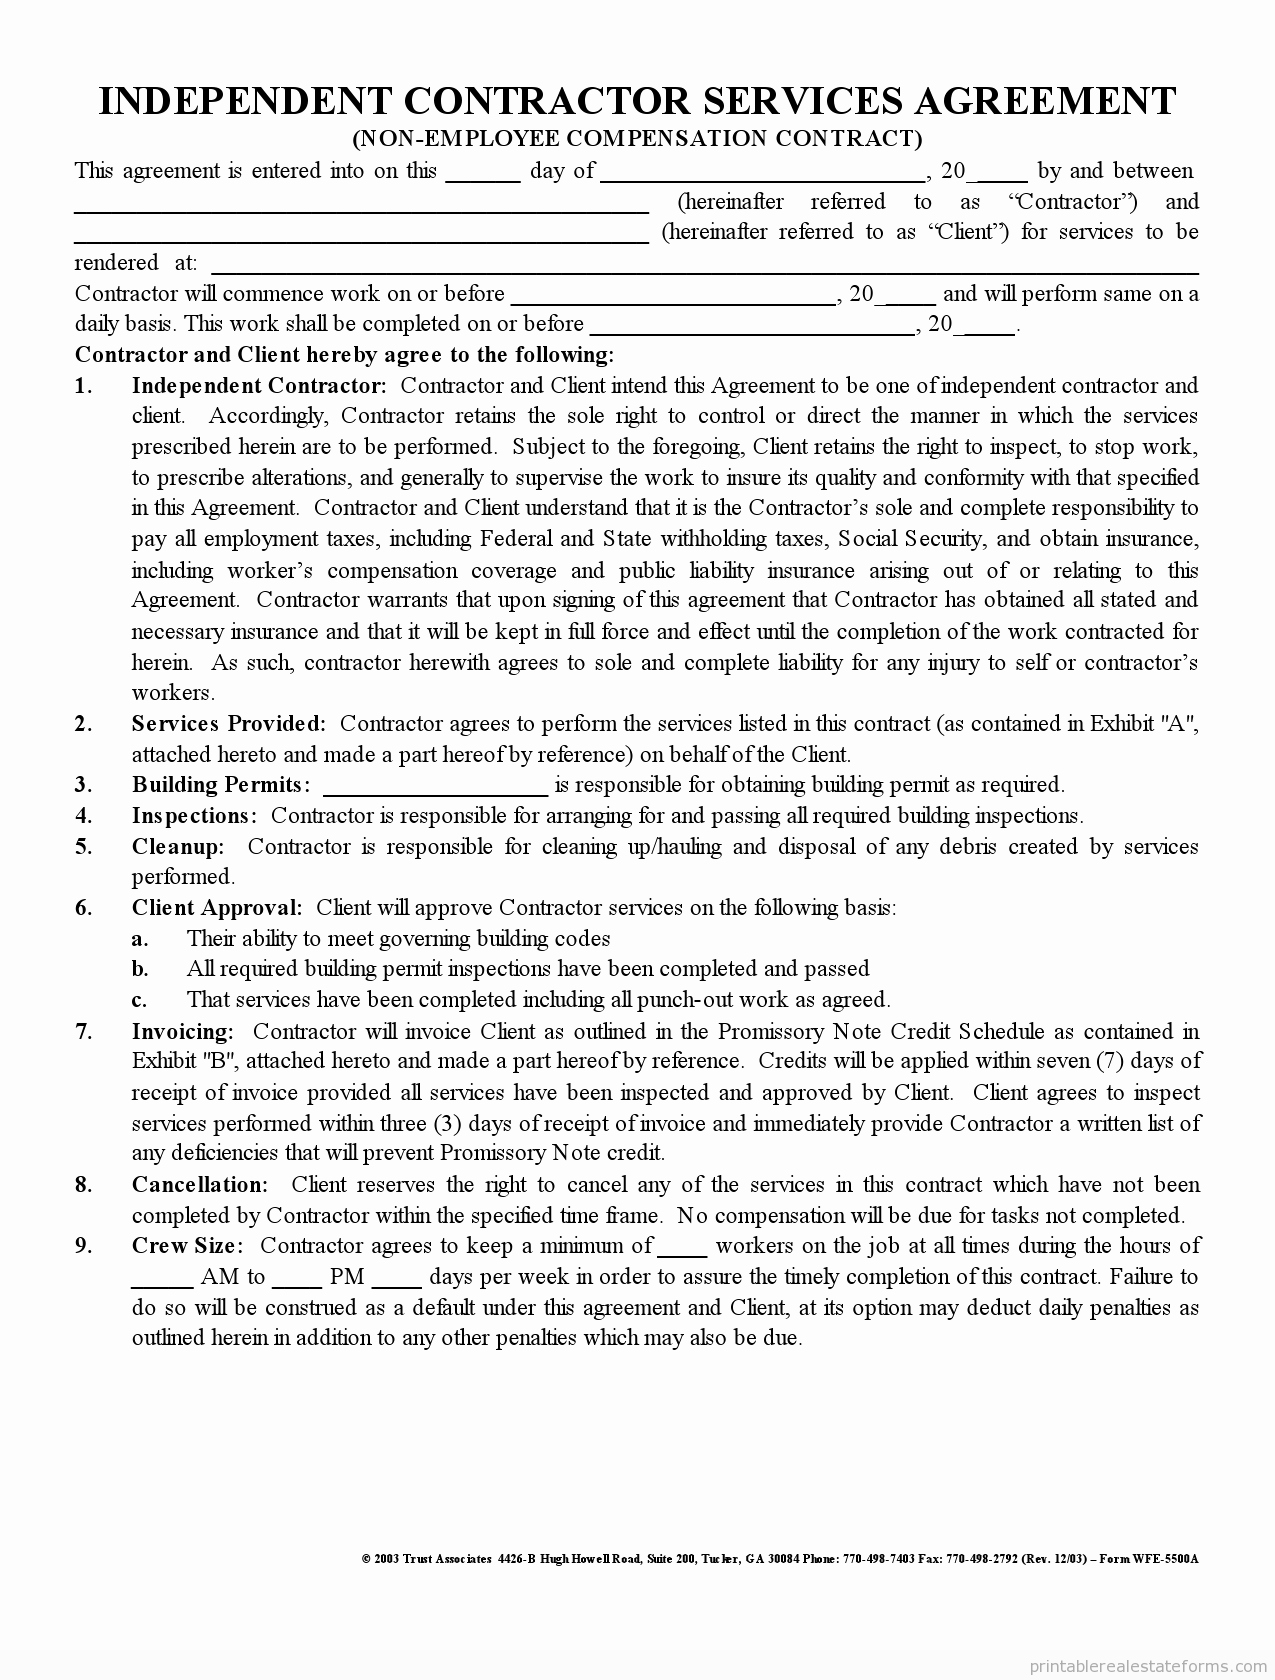 Free Printable Contractor forms Best Of Free Printable Independent Contractor Agreement form